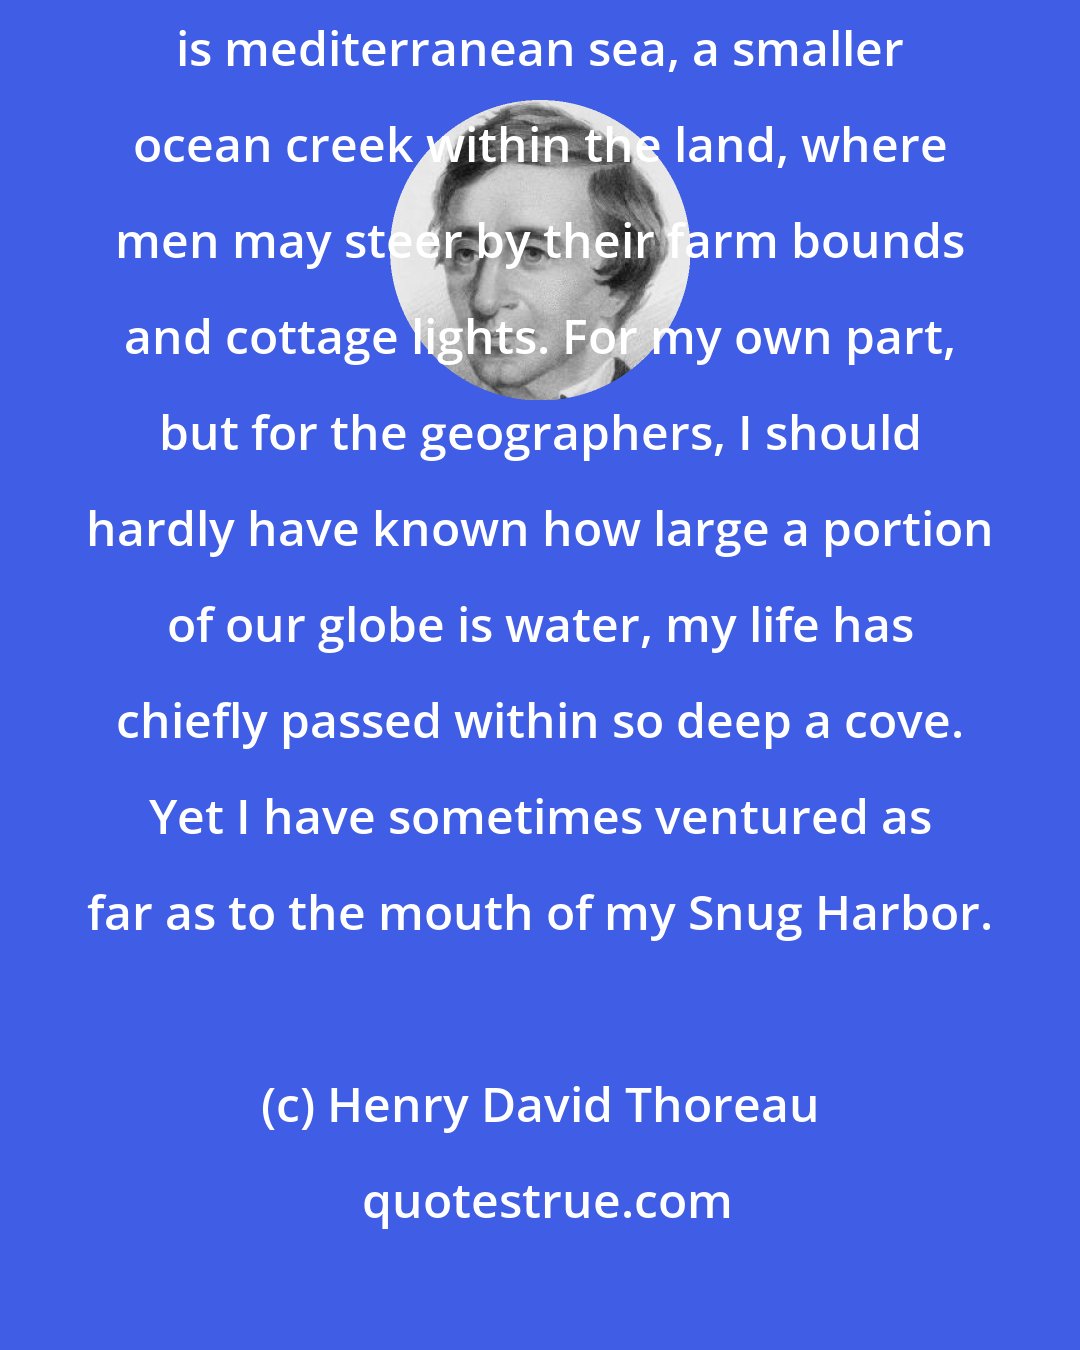 Henry David Thoreau: It might be seen by what tenure men held the earth. The smallest stream is mediterranean sea, a smaller ocean creek within the land, where men may steer by their farm bounds and cottage lights. For my own part, but for the geographers, I should hardly have known how large a portion of our globe is water, my life has chiefly passed within so deep a cove. Yet I have sometimes ventured as far as to the mouth of my Snug Harbor.